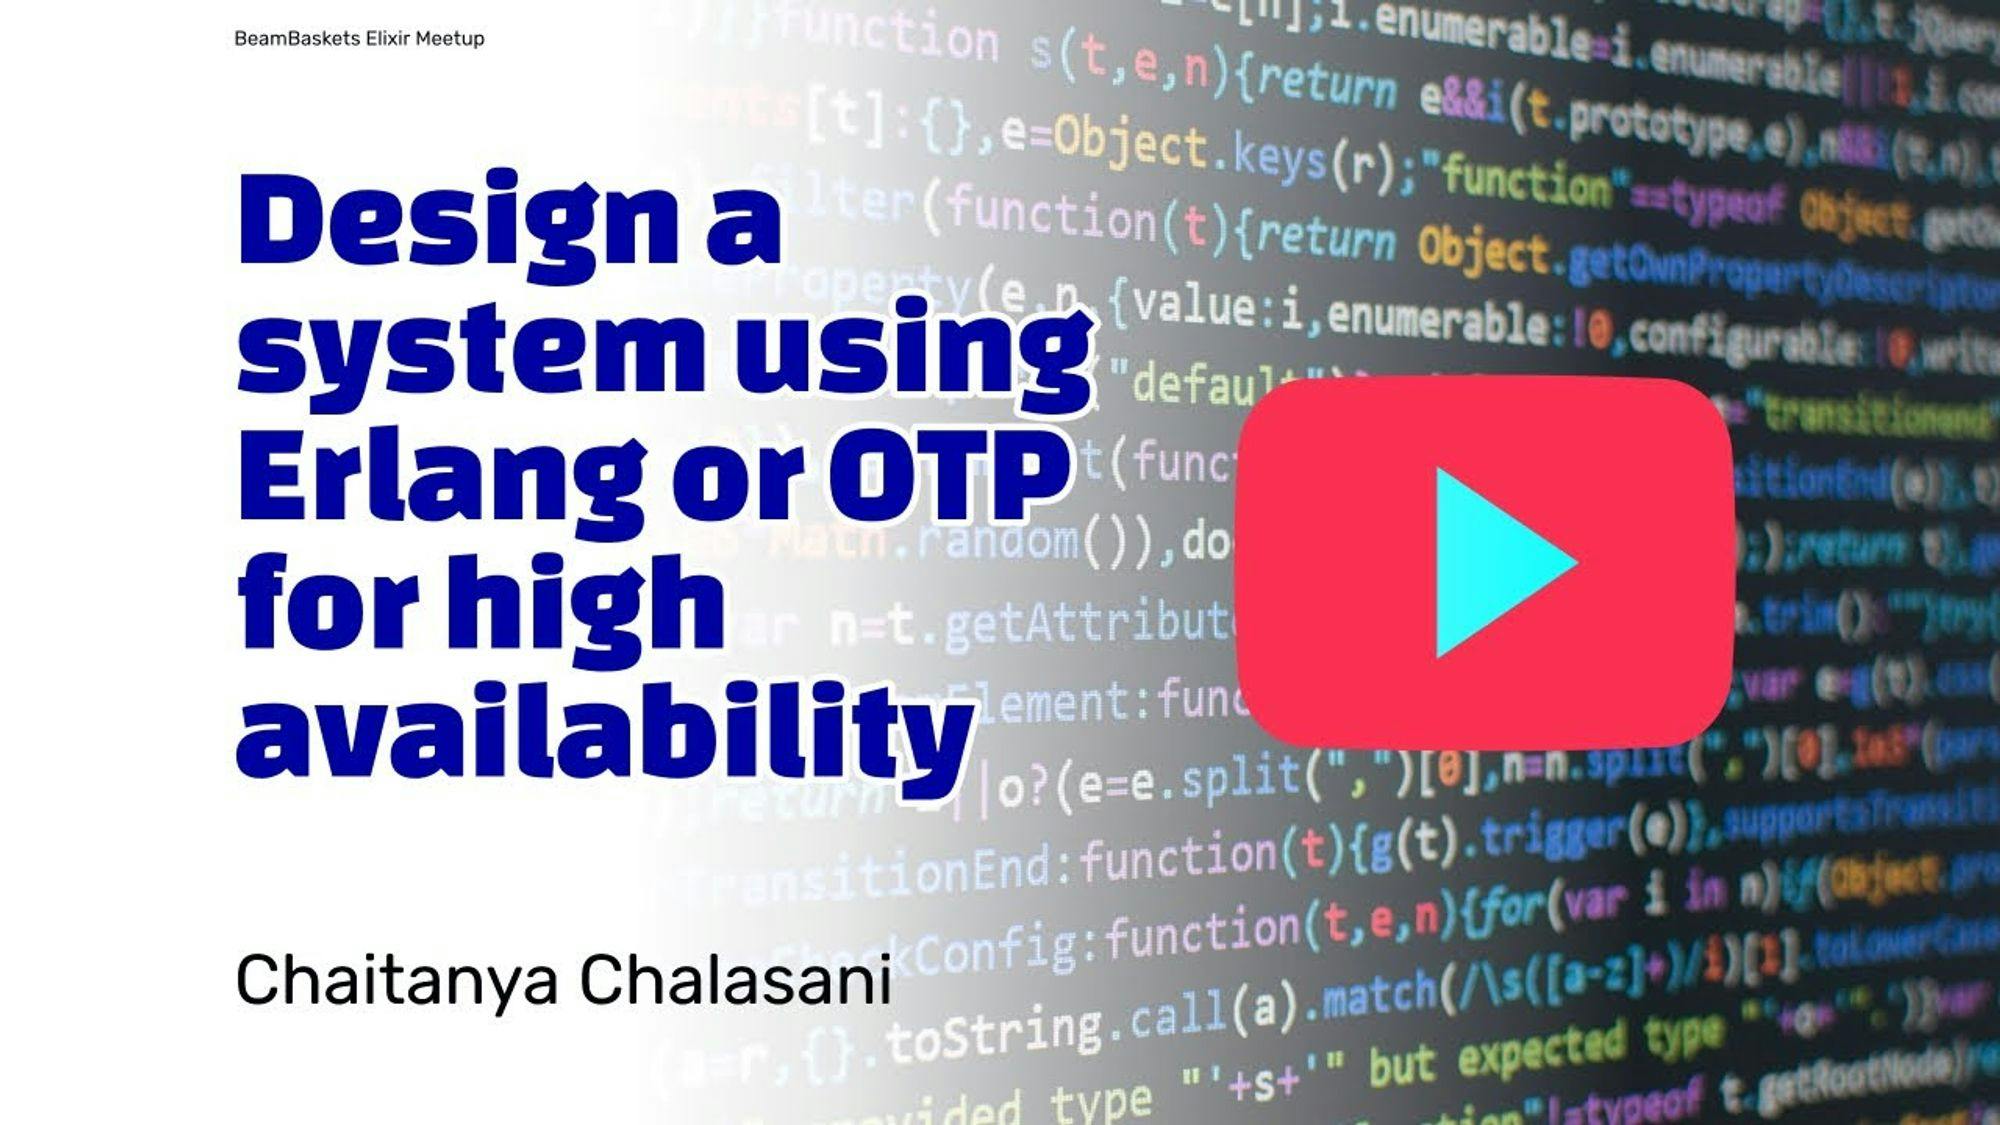 Design a system using Erlang or OTP for high availability - Chaitanya Chalasani. Beambasket Meetup